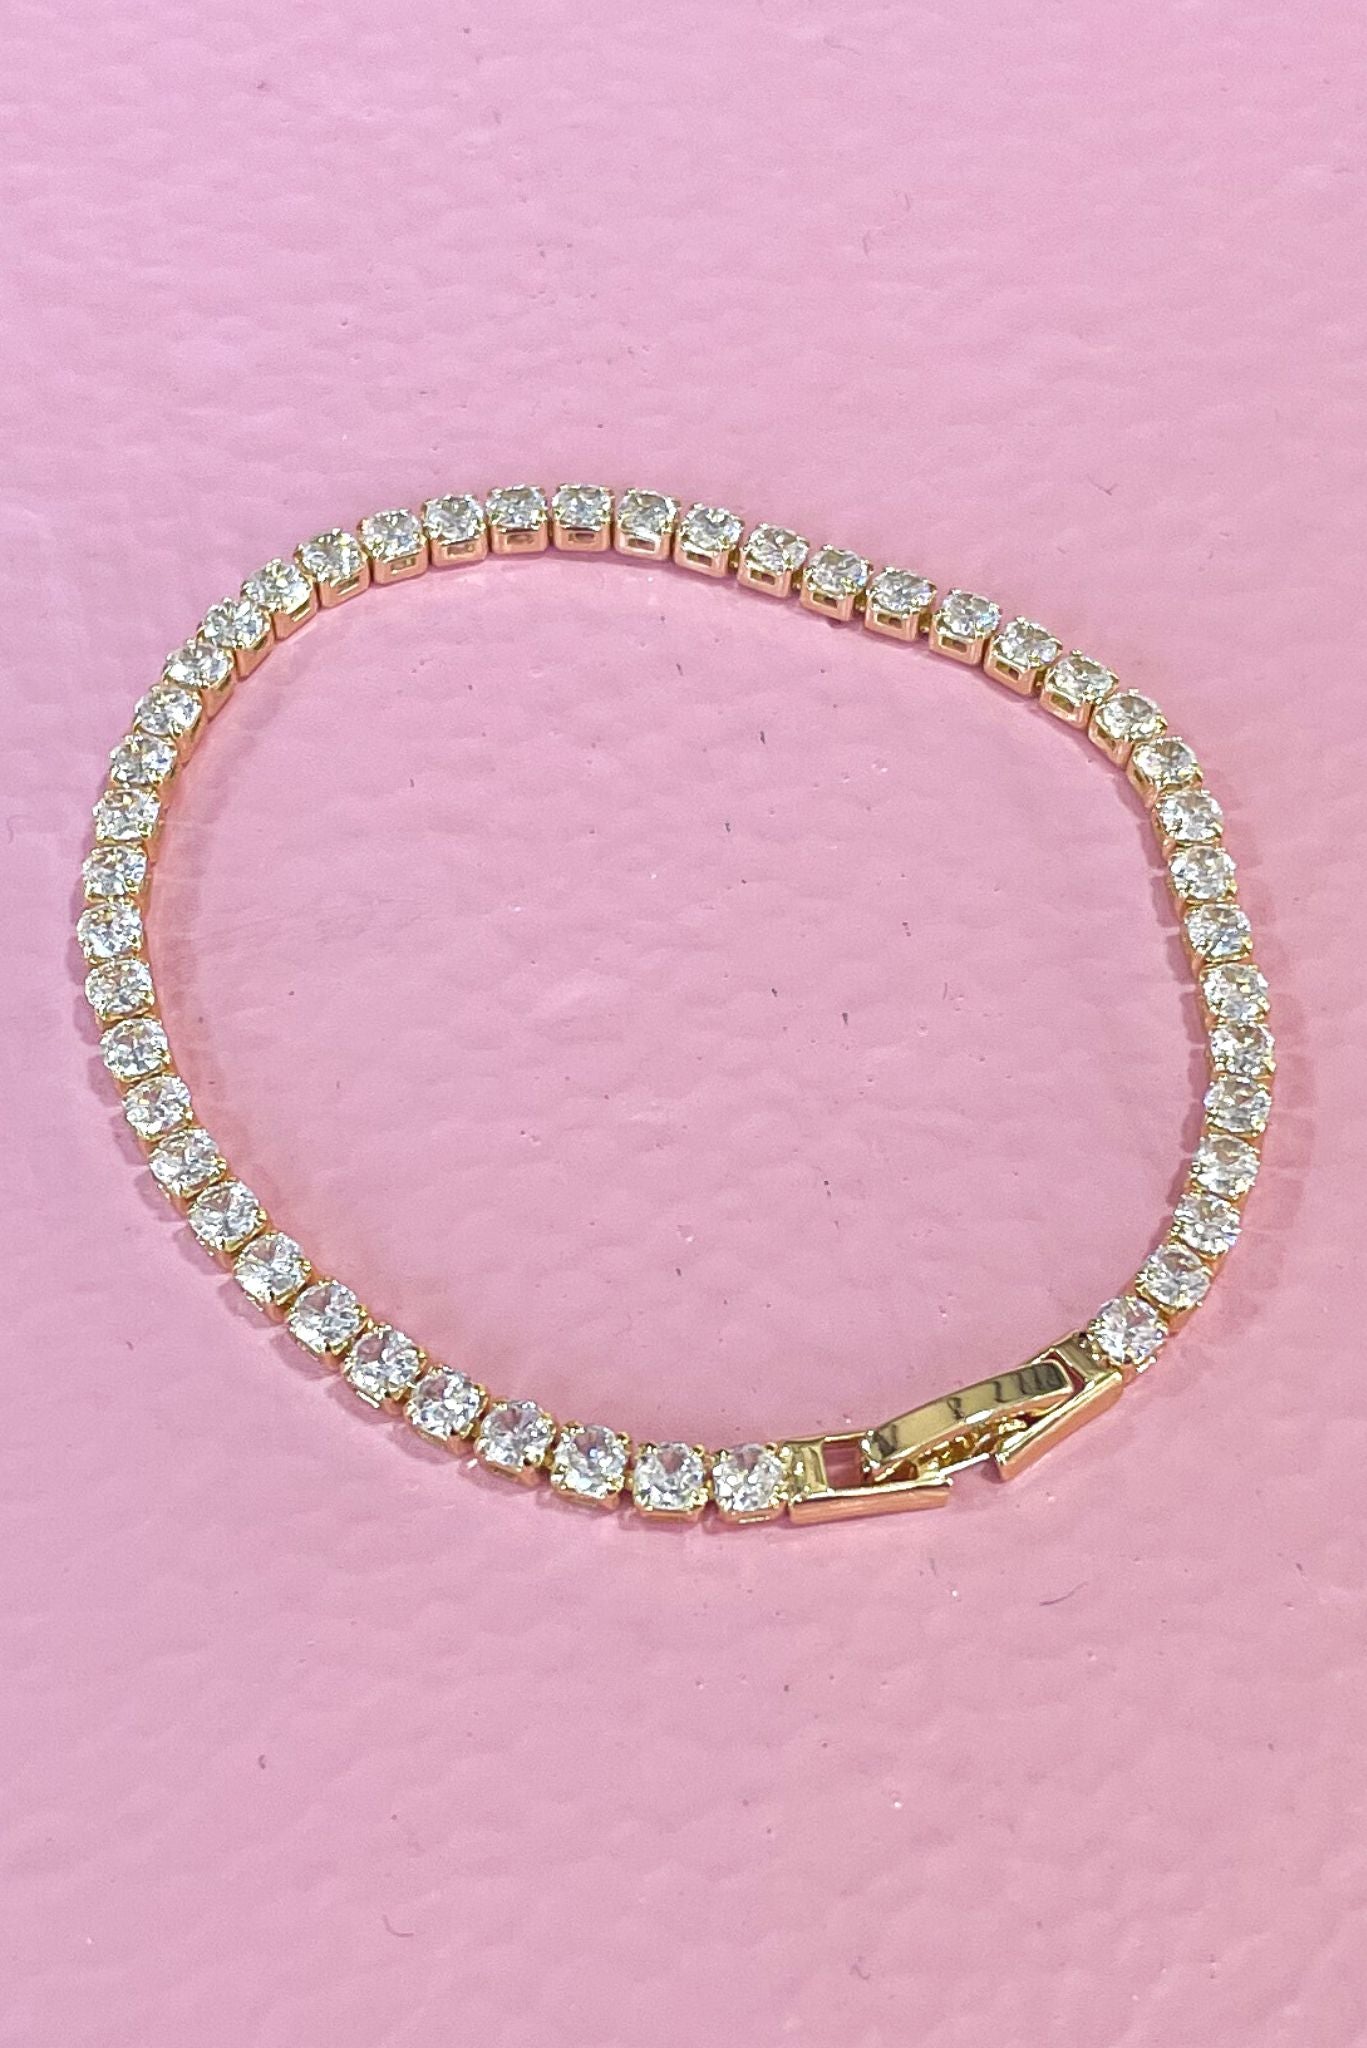 Small Gold Square Rhinestone Snap Lock Bracelet, gold bracelet, chunky necklace, elevated look, date night, mom style, must have, shop style your senses by mallory fitzsimmons